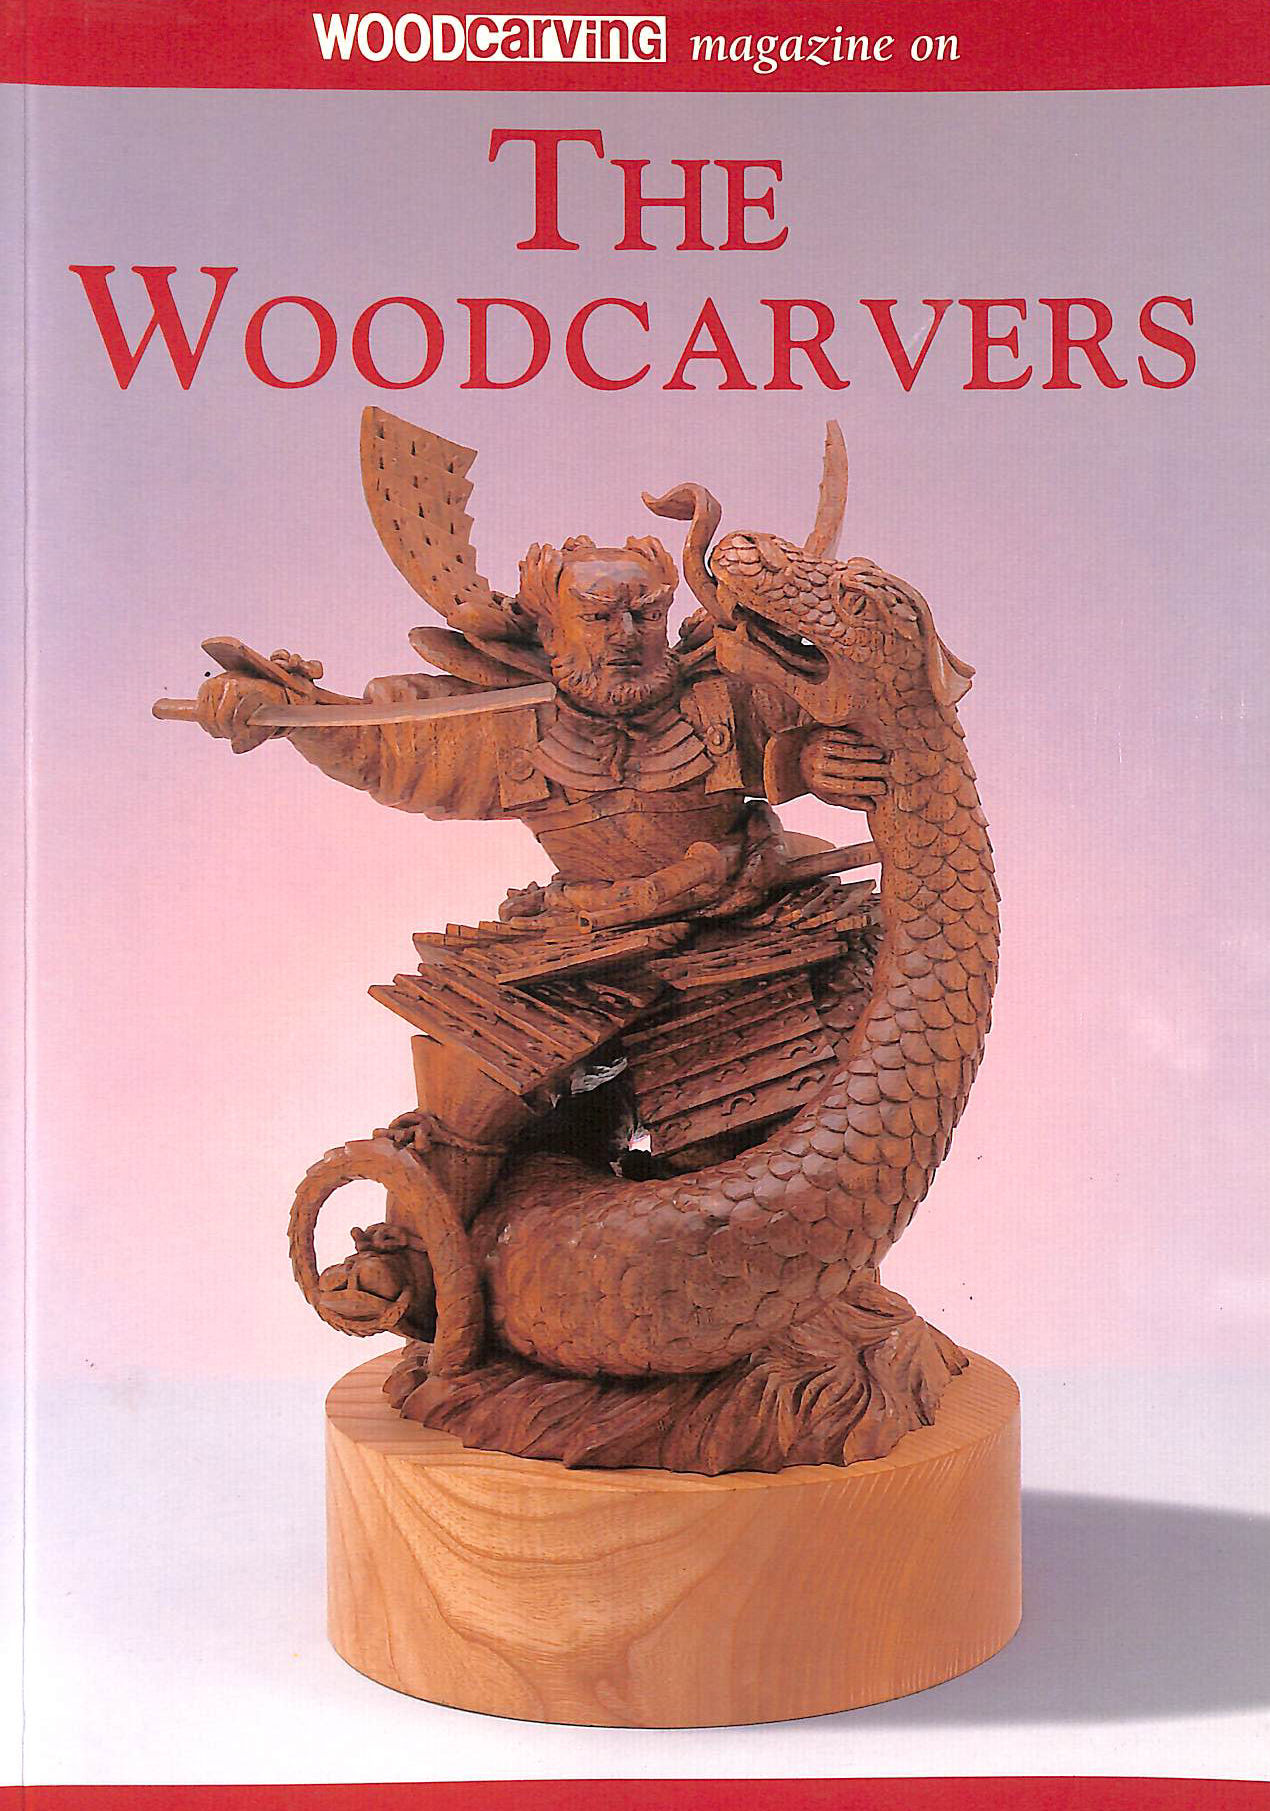 WOODCARVING ILLUSTRATED; NEIL BELL [EDITOR] - Woodcarving Magazine on the Woodcarvers